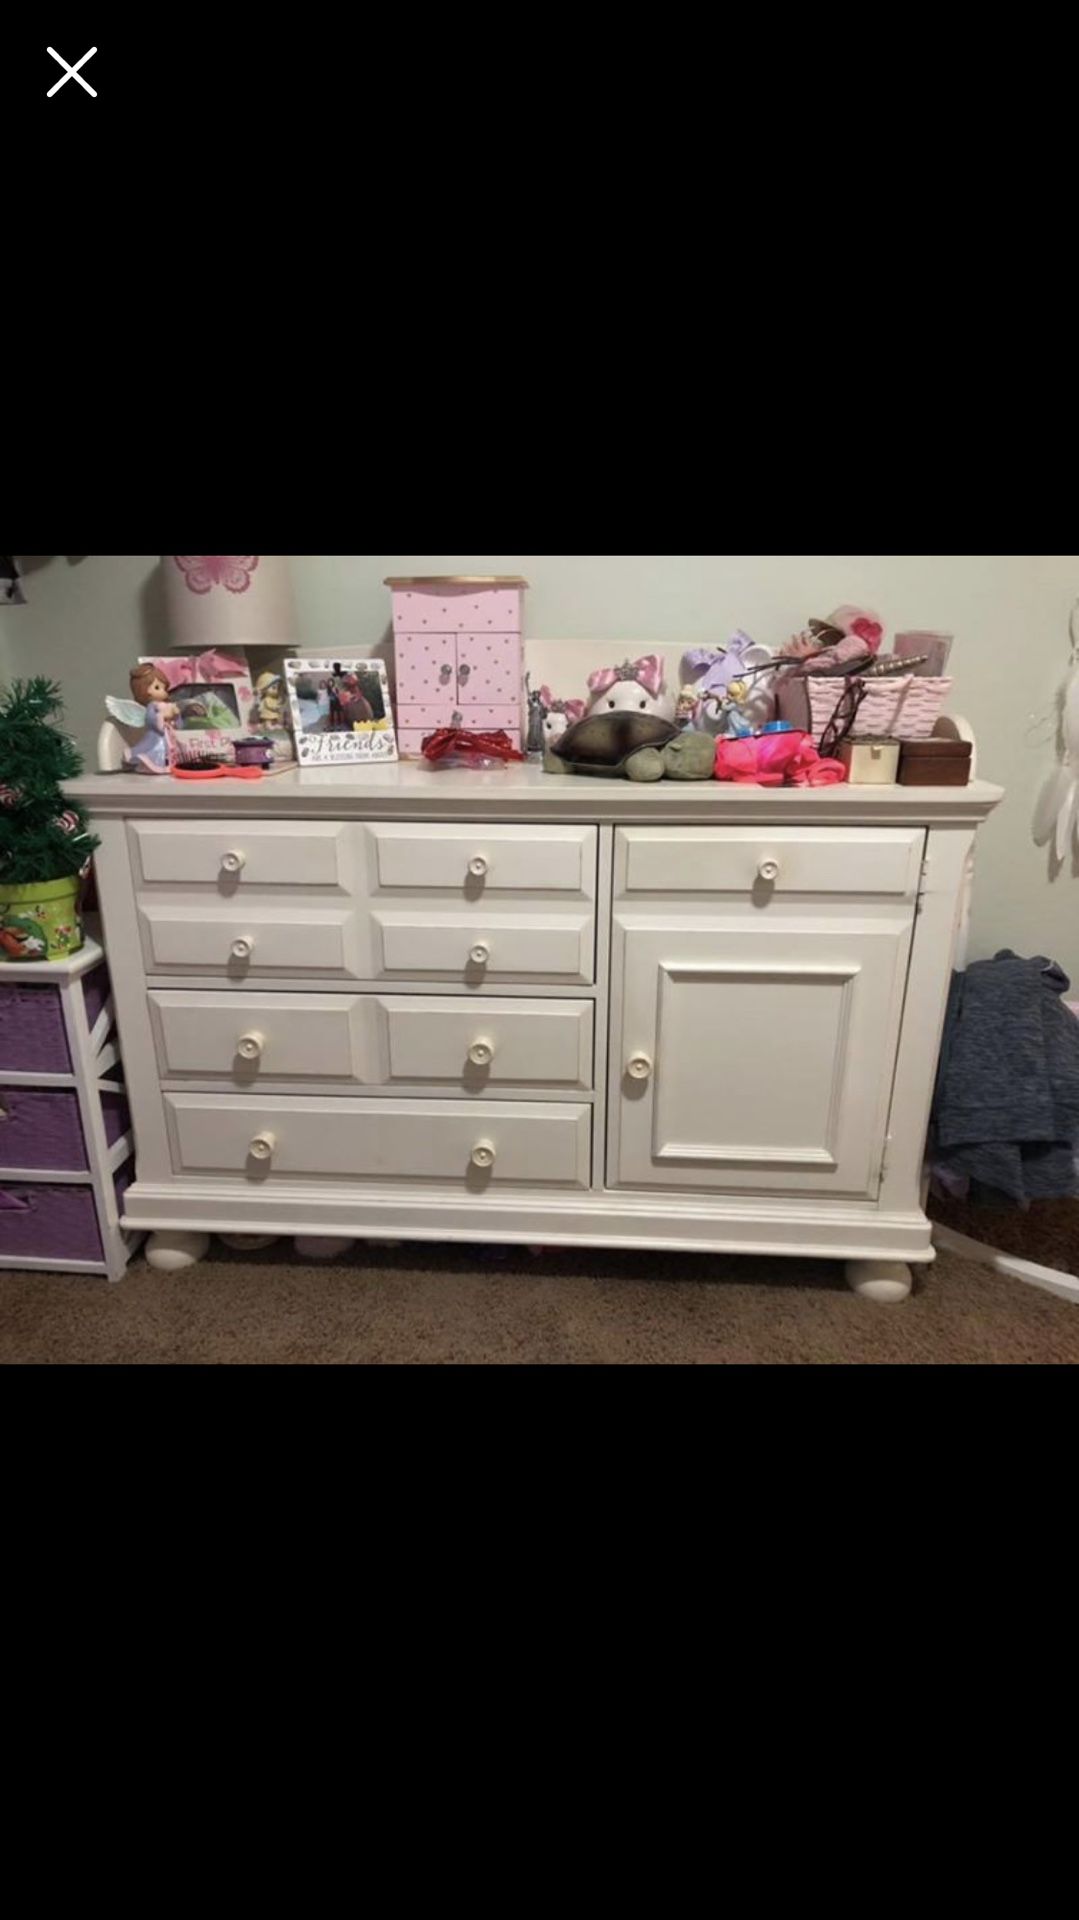 Bellini dresser/ changing table